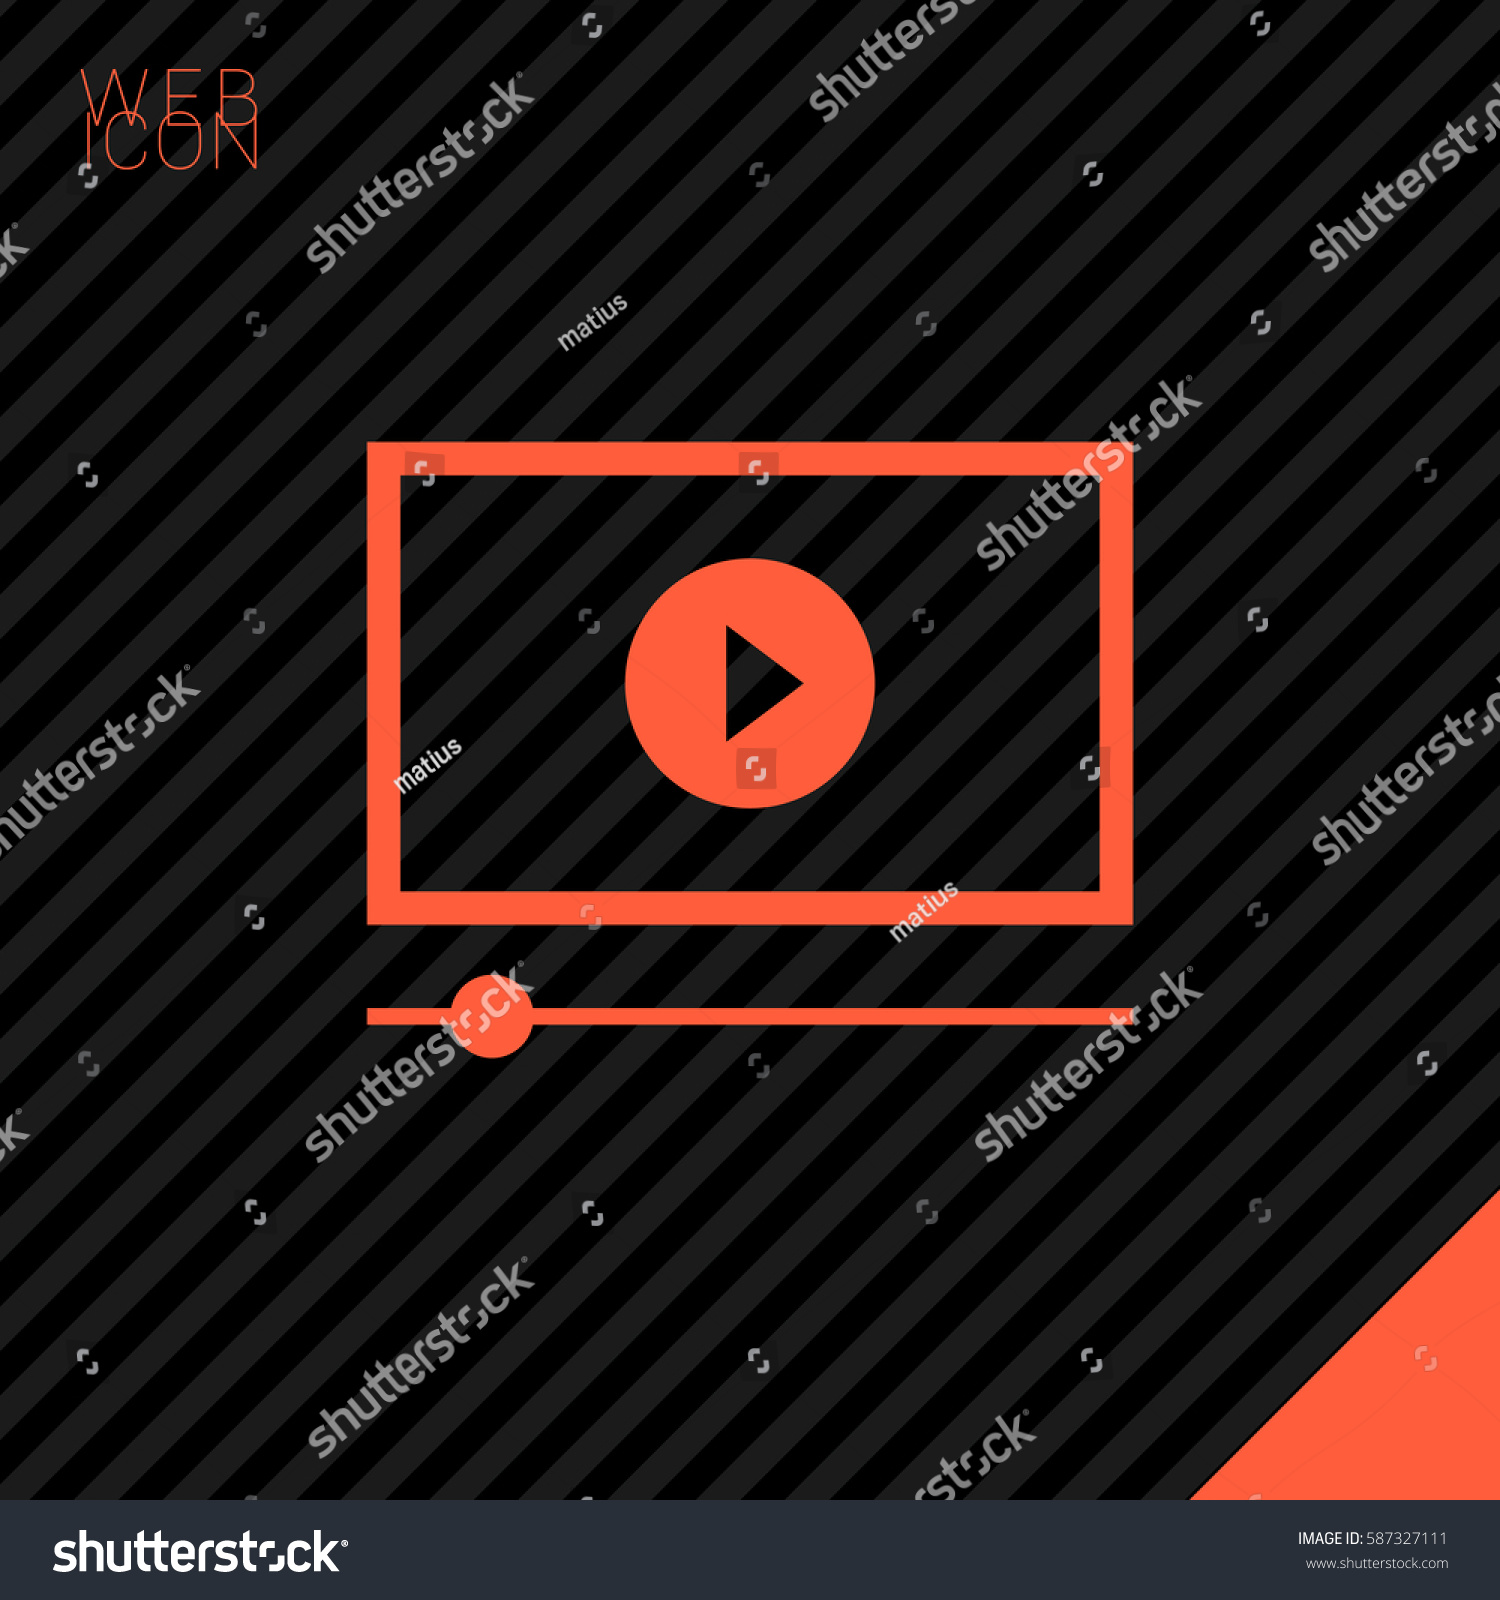 Edit Vectors Free Online - button isolated | Shutterstock Editor